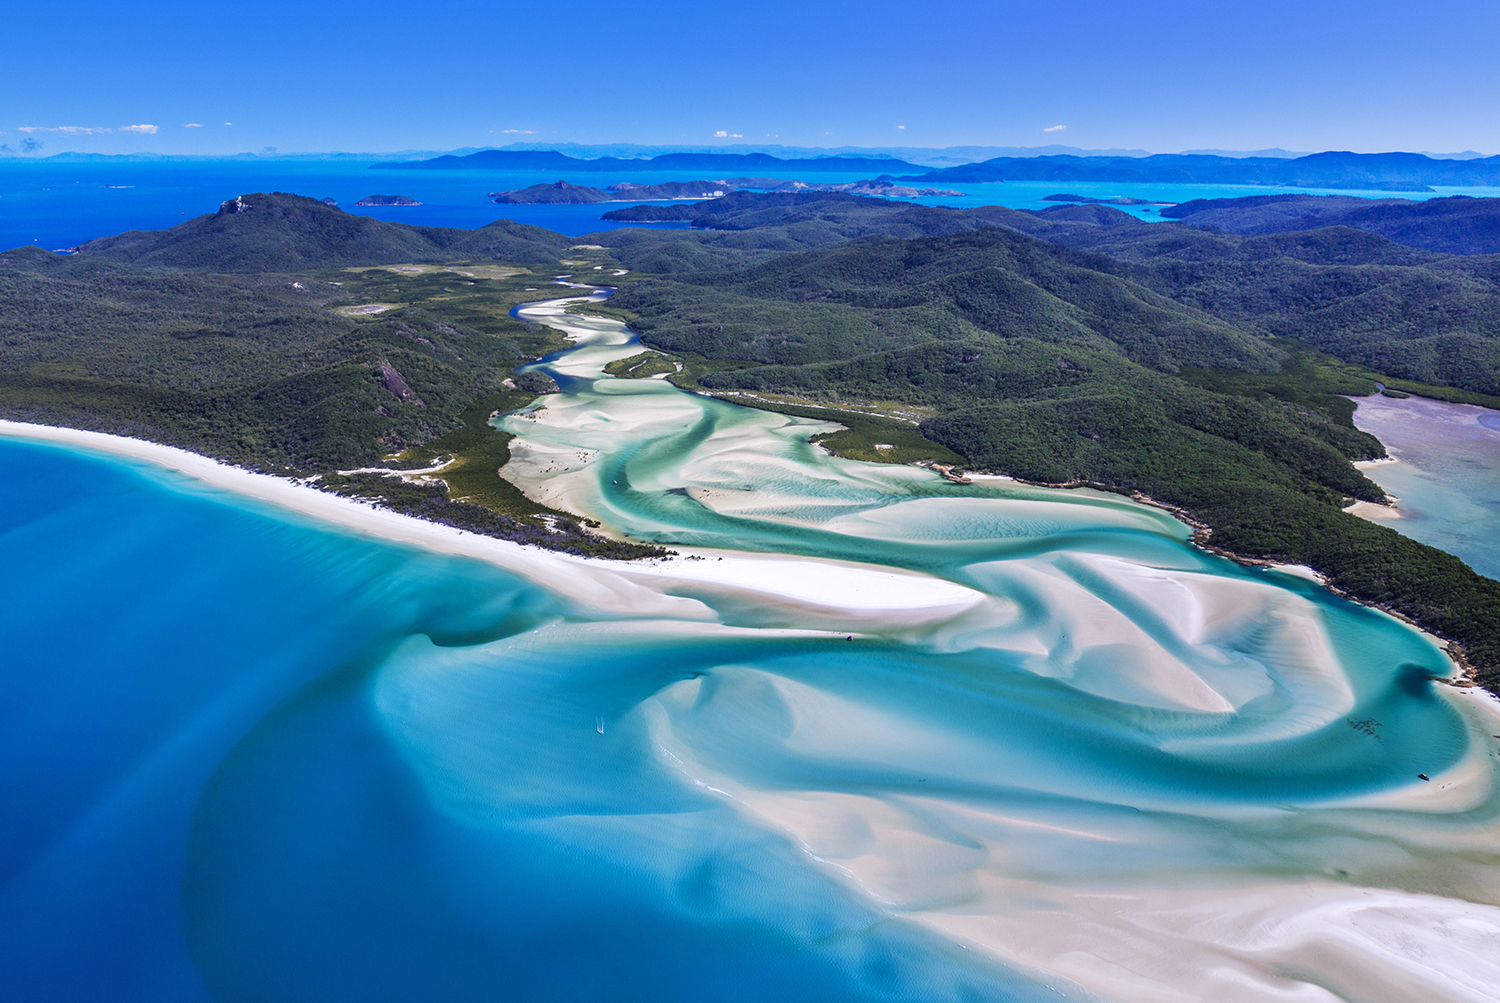 Paradise found: an aerial view over Whitehaven Beach in Queenland's Whitsunday Islands. Image by Yoshio Tomii / Getty Images